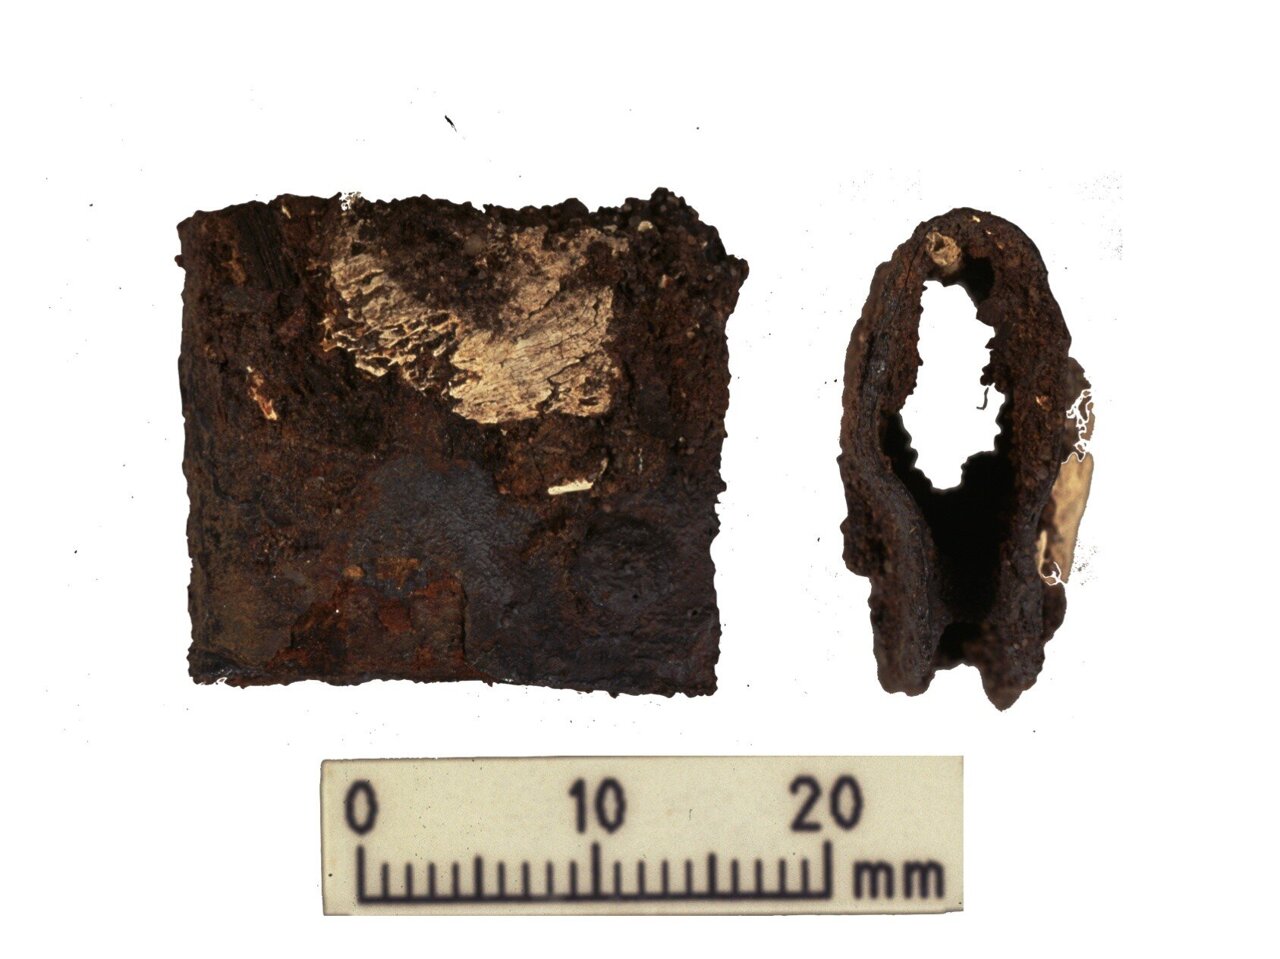 Clasp from the Viking warrior’s shield found during the original excavations in 1998-2000. The clasp was found in the same grave as the human and animal remains analyzed during the latest research.